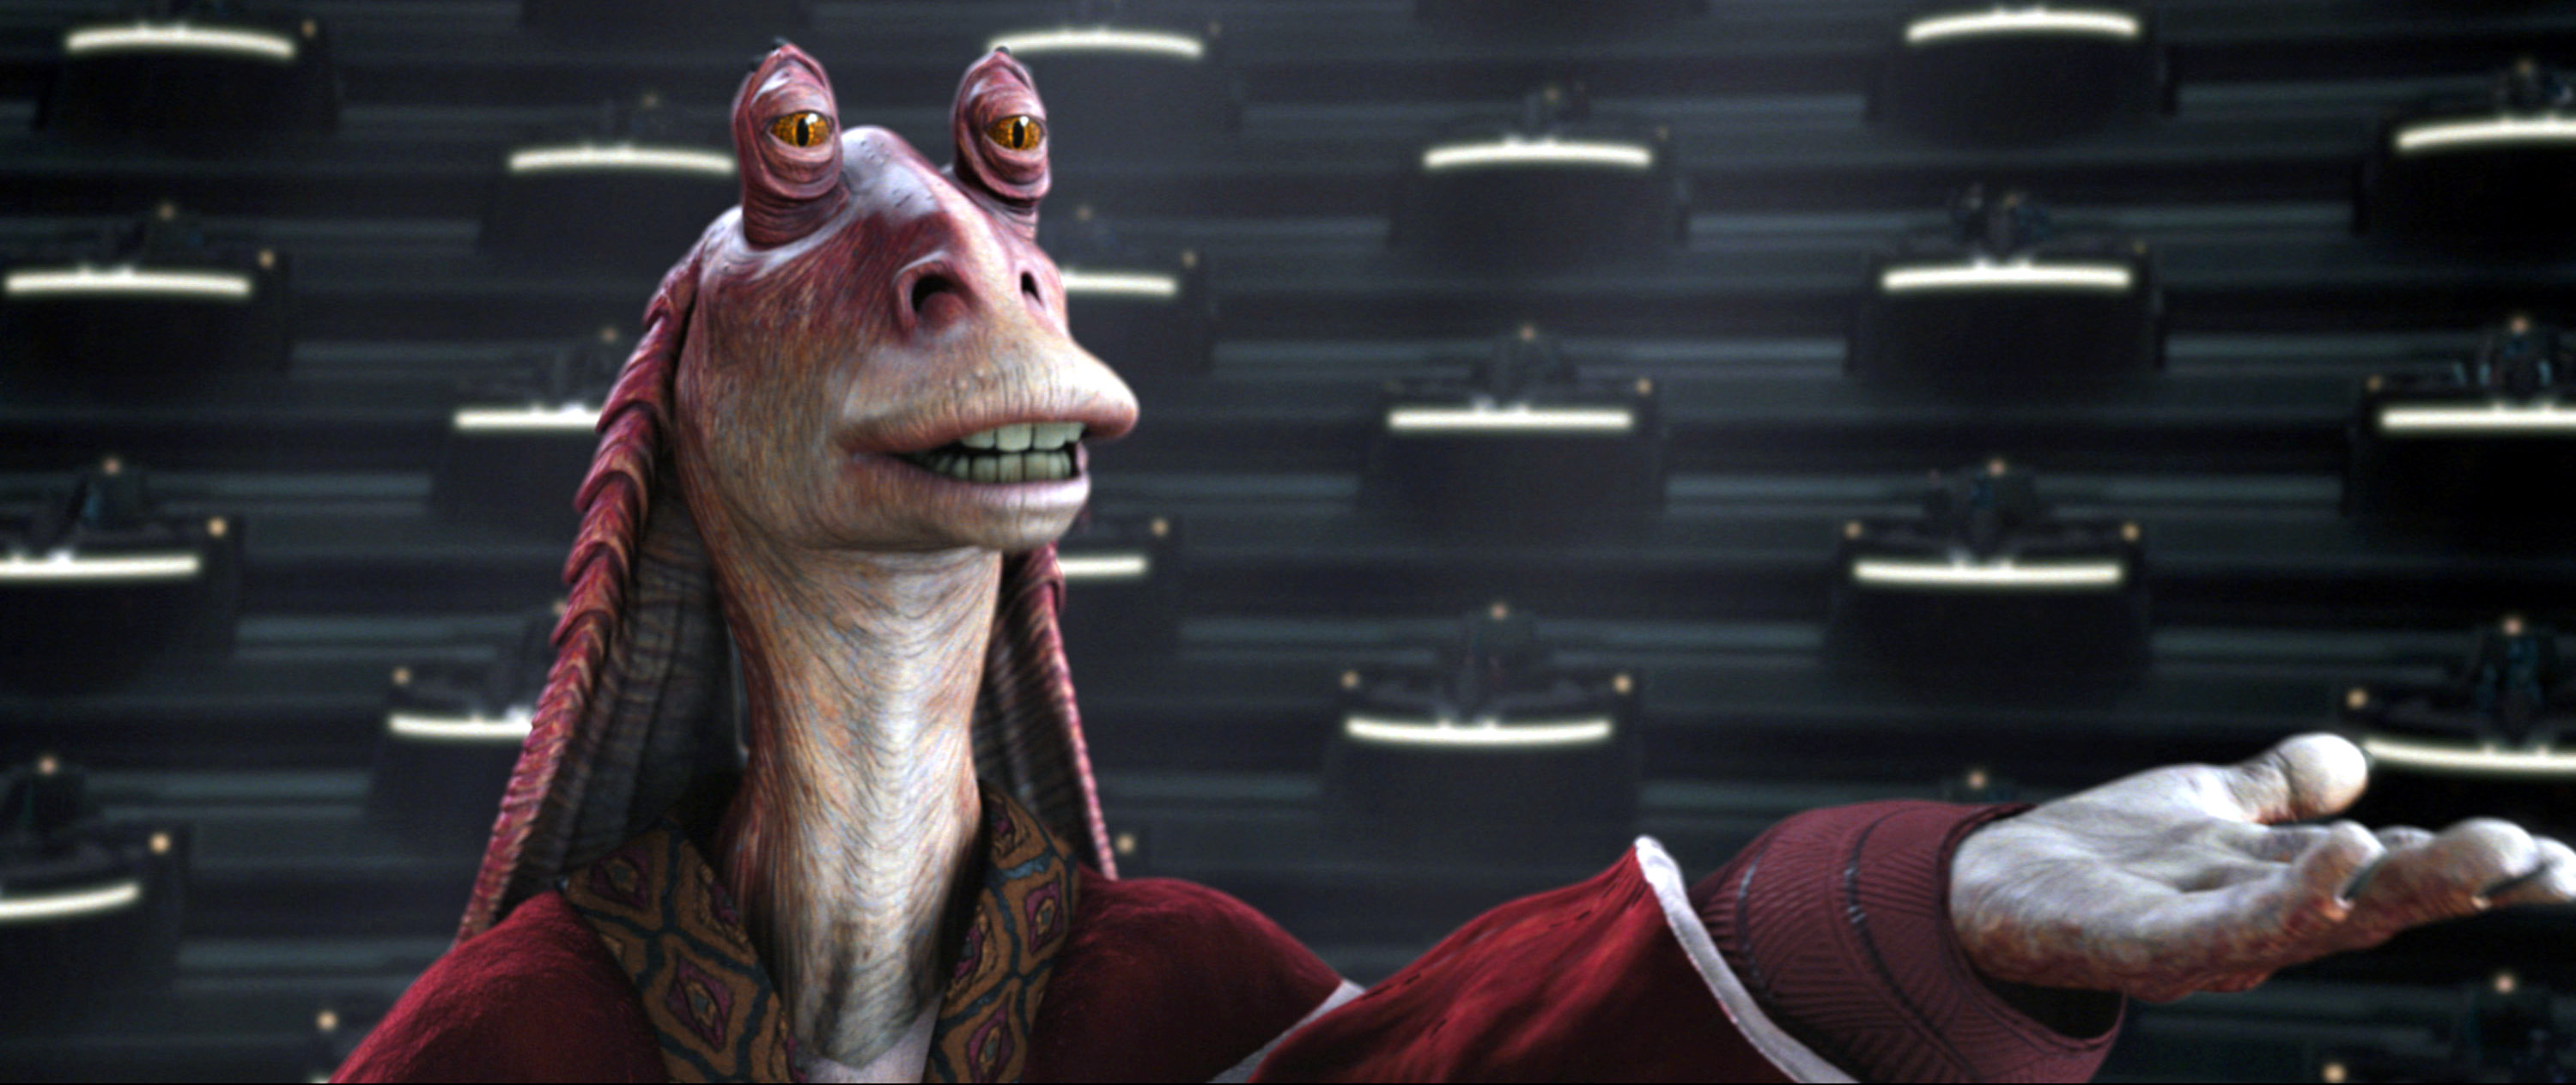 One Fan Has A ‘star Wars Theory About Jar Jar Binks That Will Make You